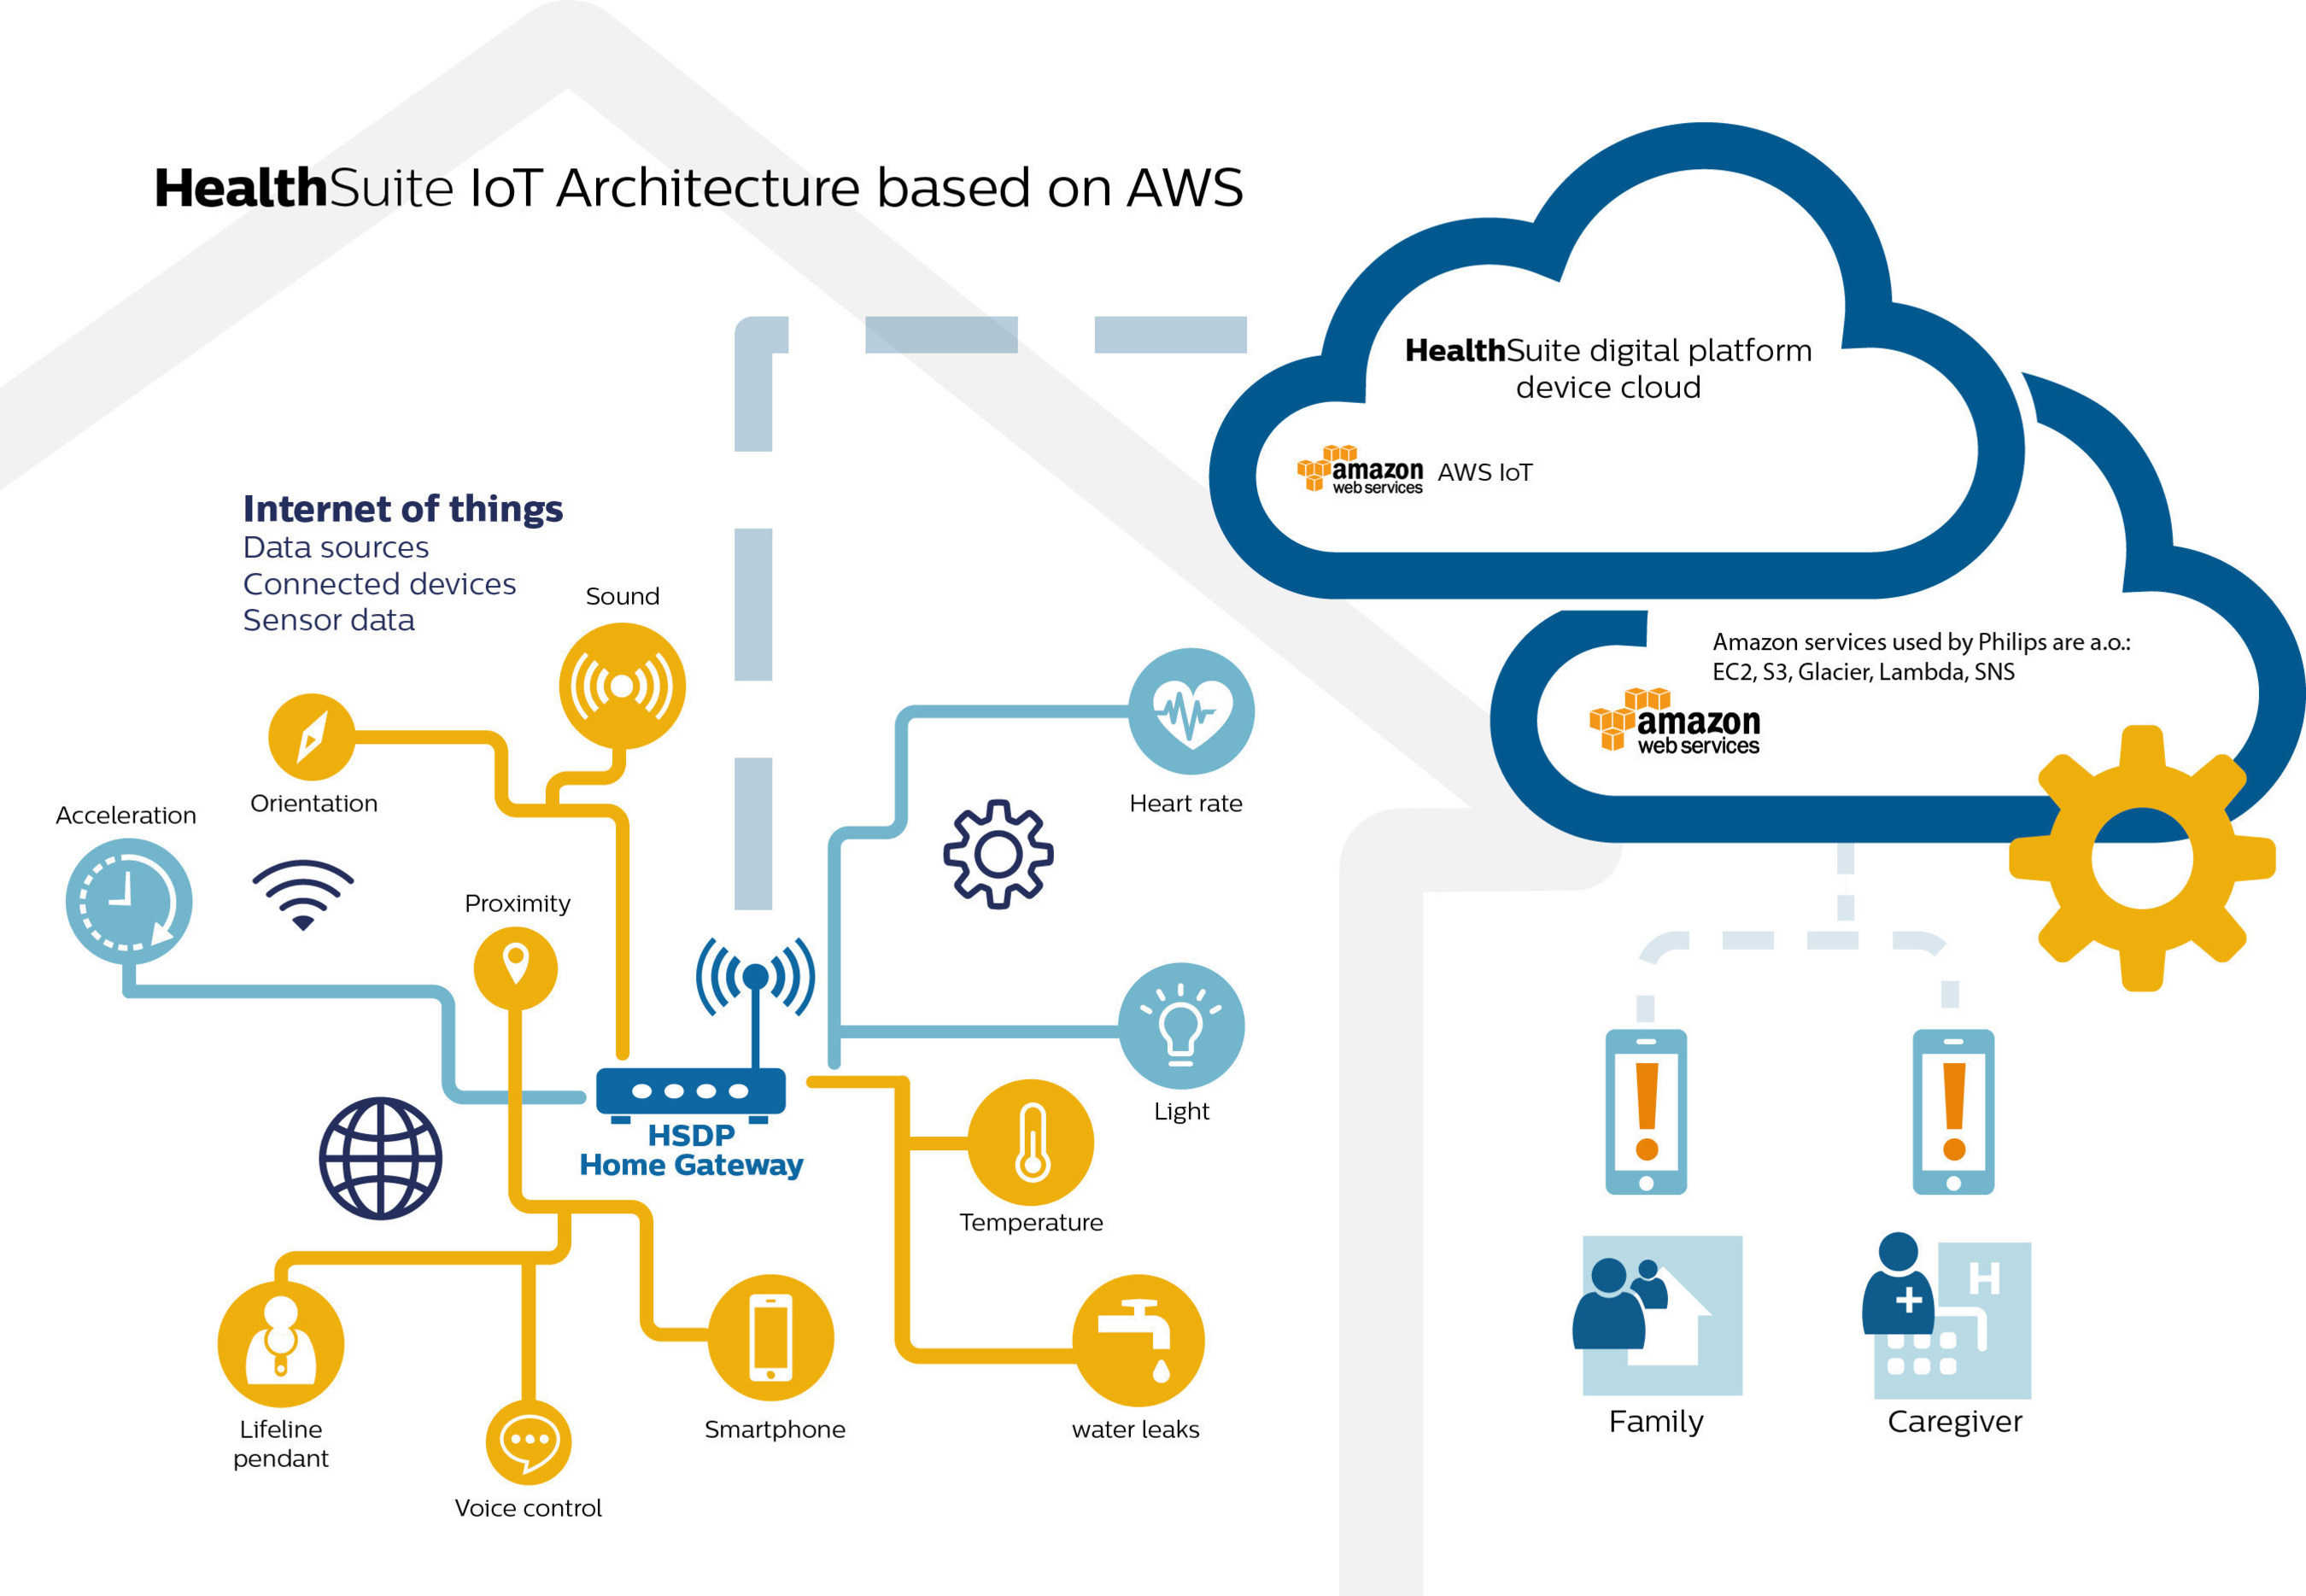 Philips HealthSuite IoT Architecture based on AWS